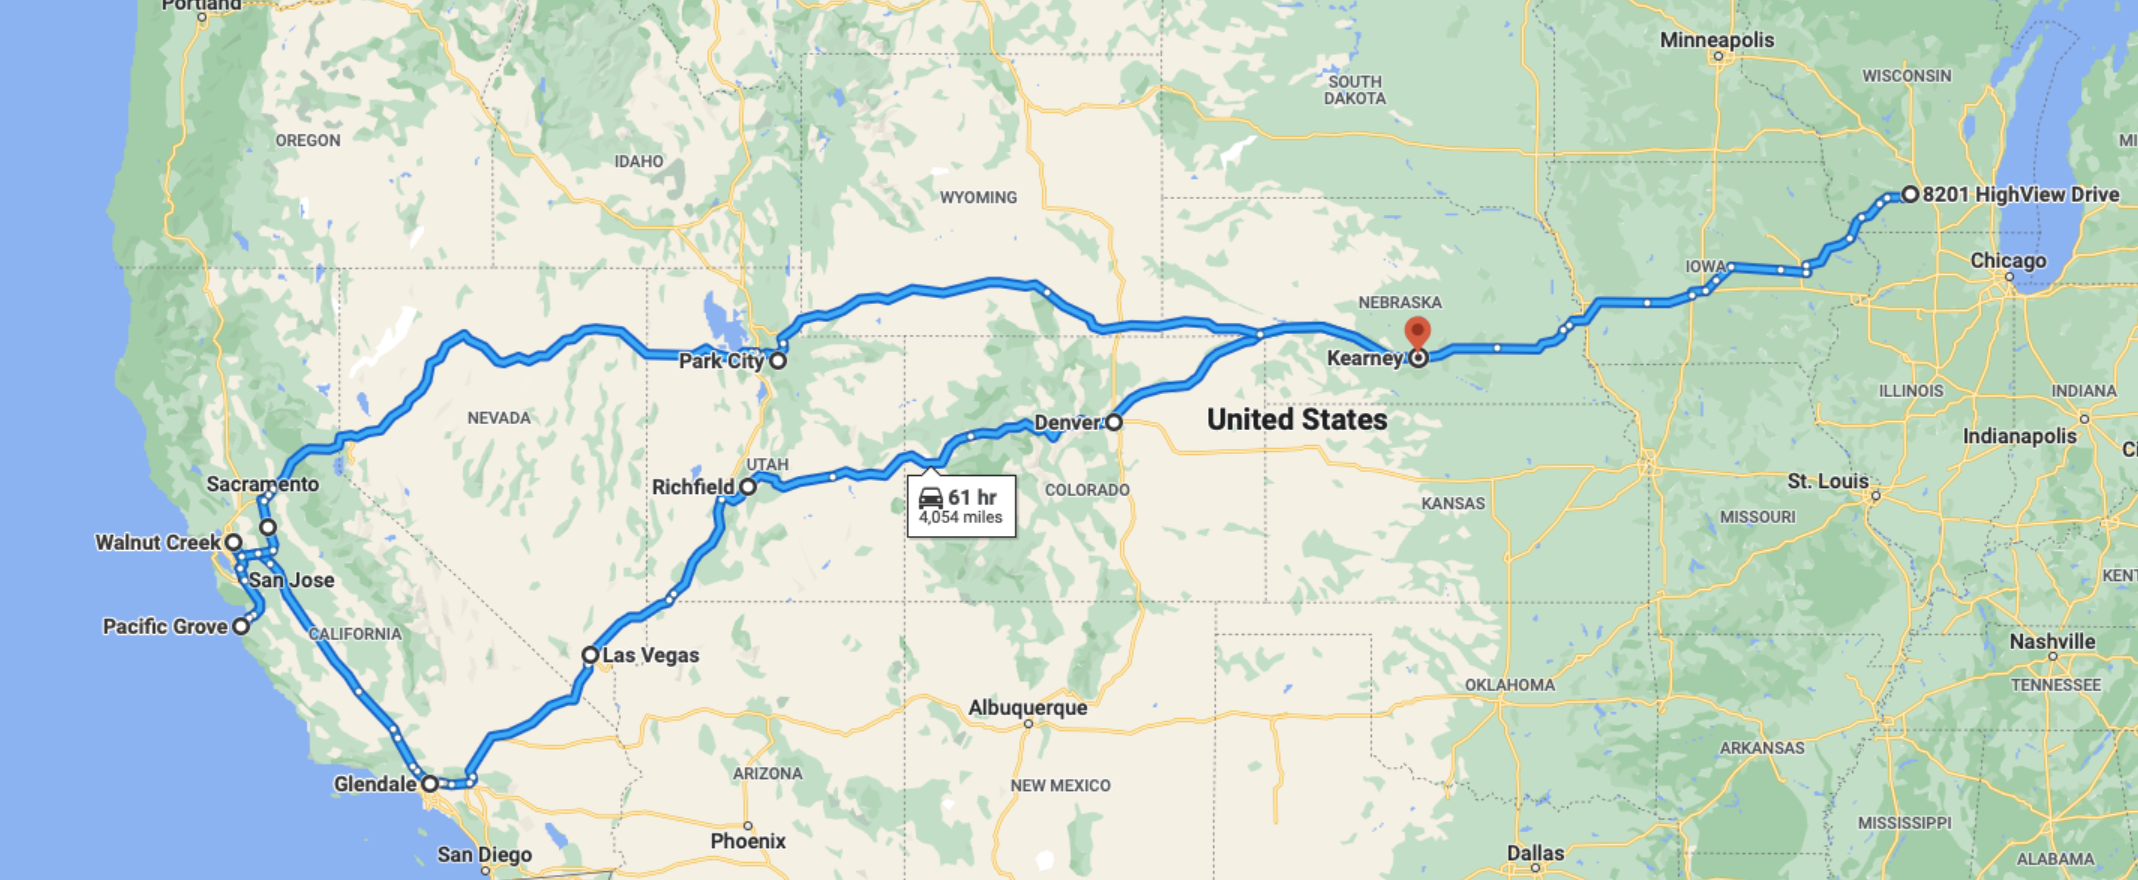 Road Trip! Wisconsin to California and Back